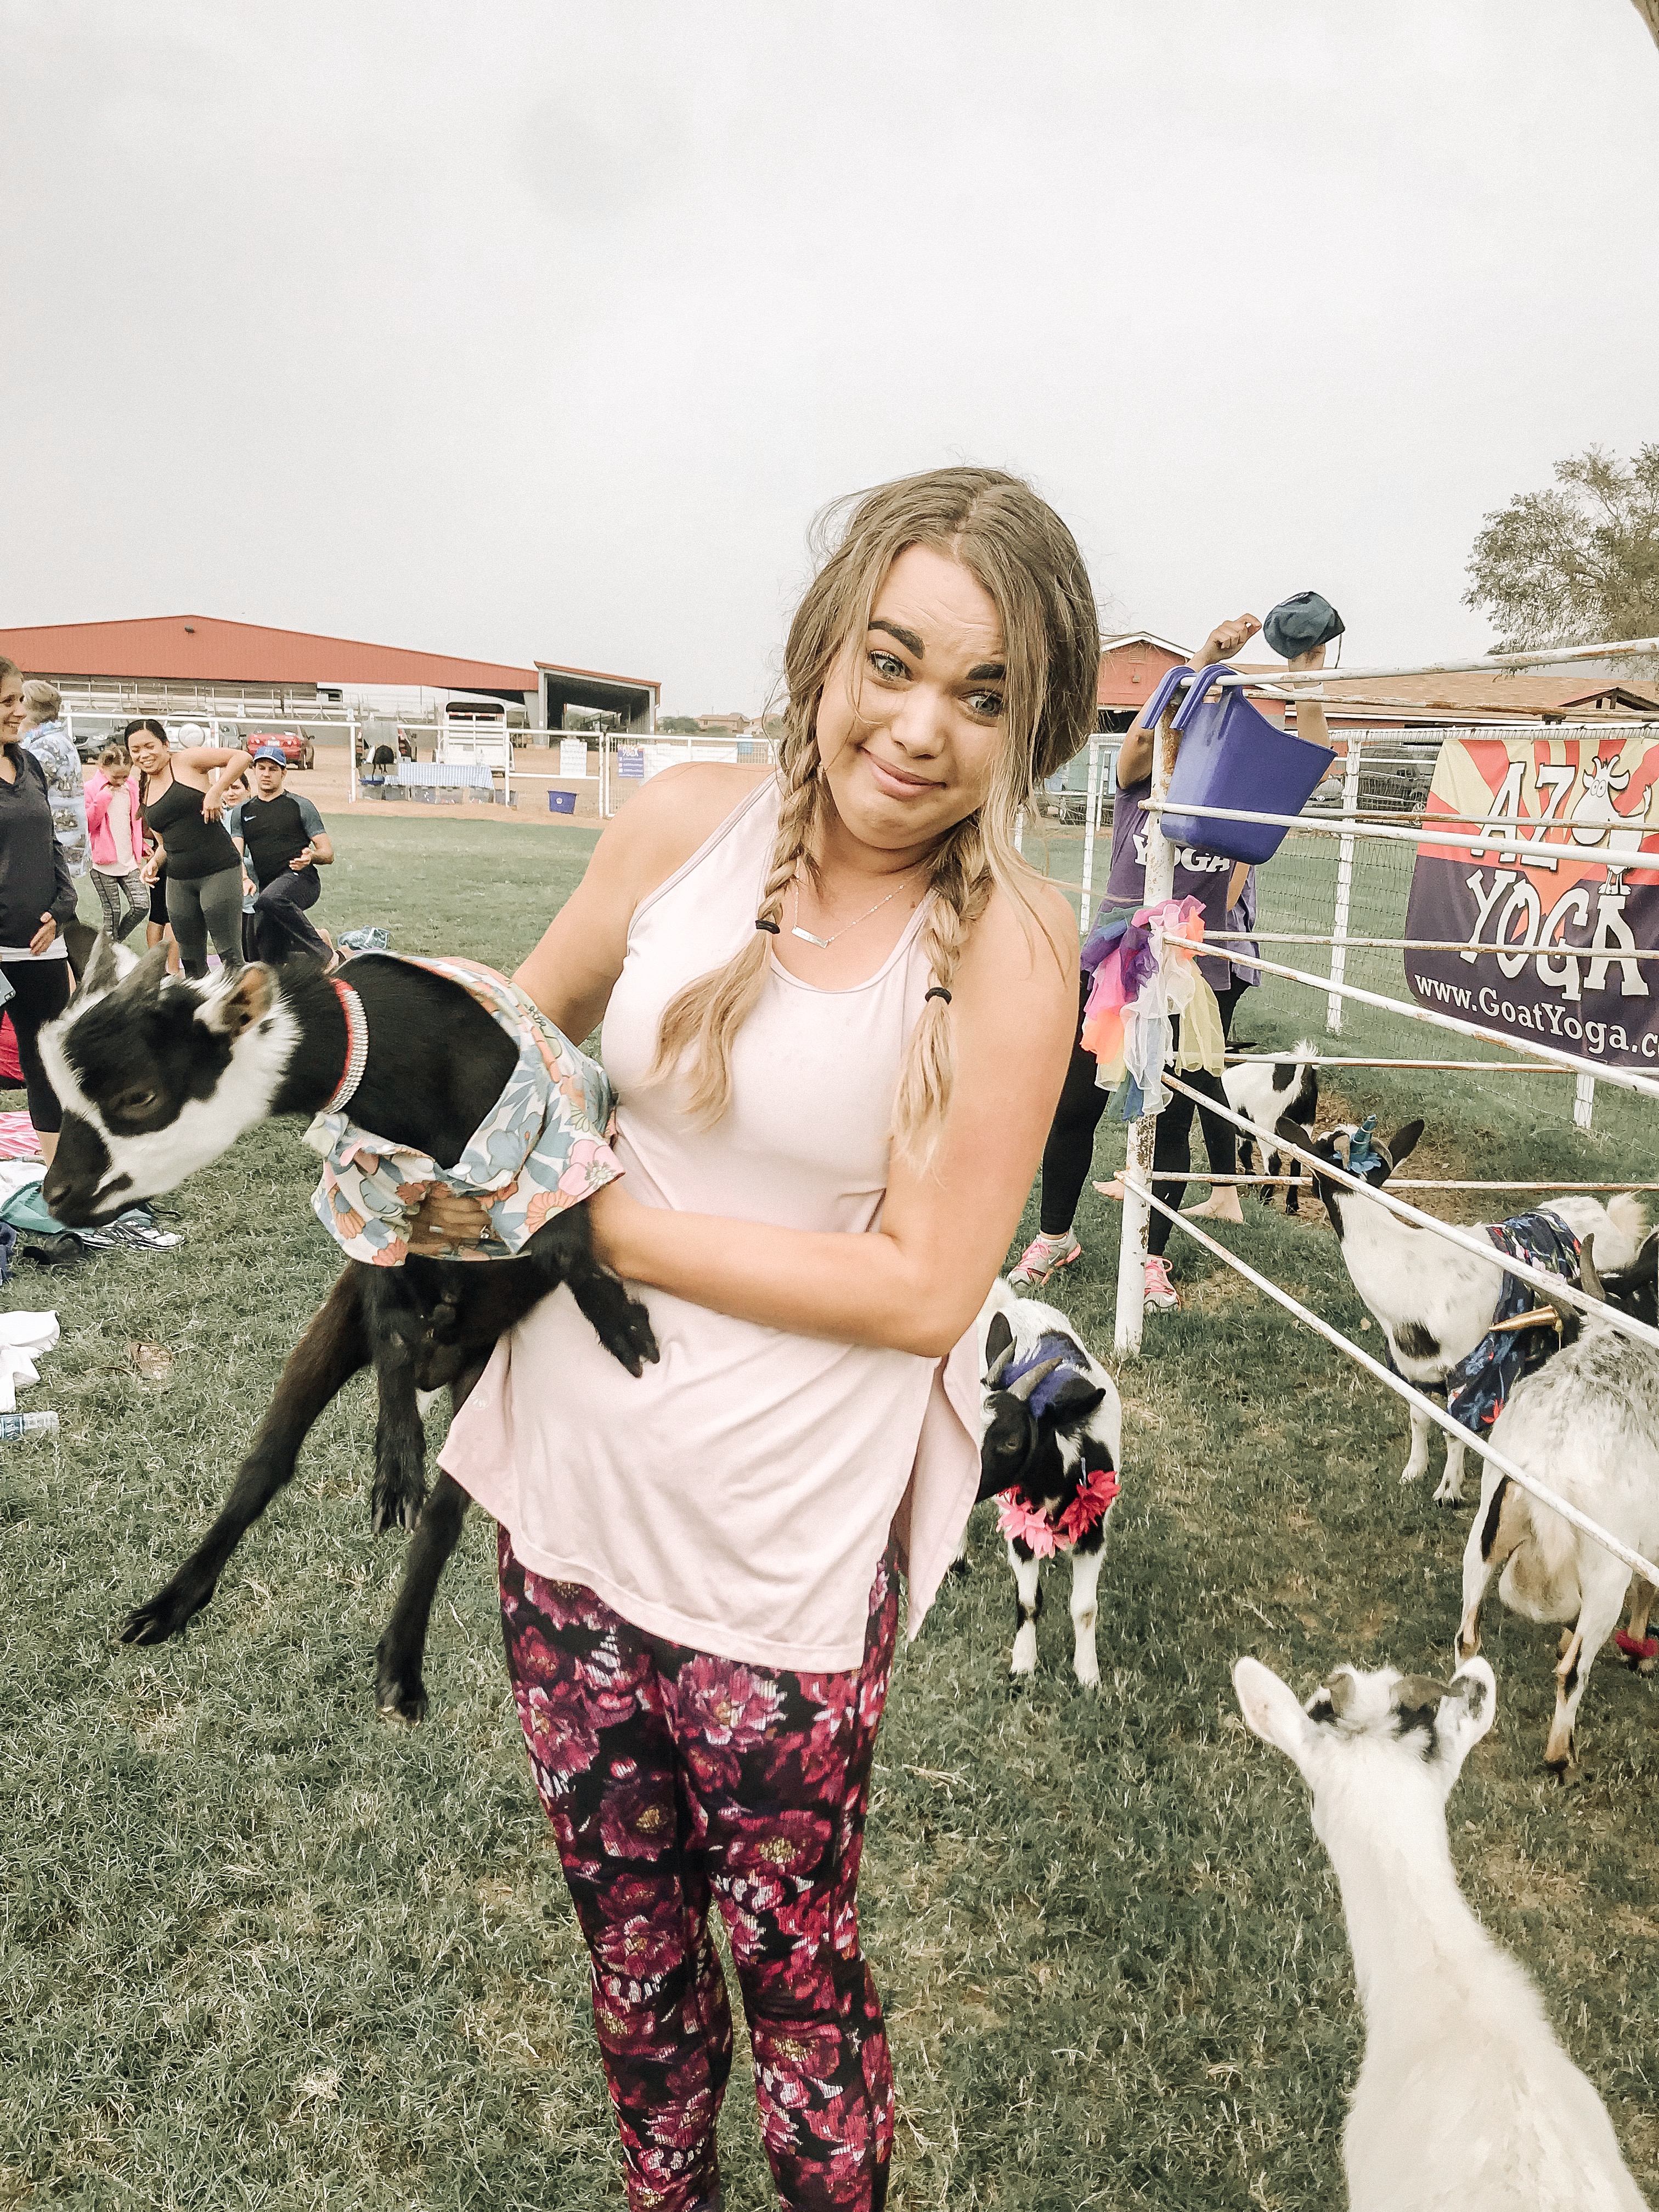 goat yoga | The Best Phoenix Travel Guide featured by top Denver travel guide, All Things Lovely